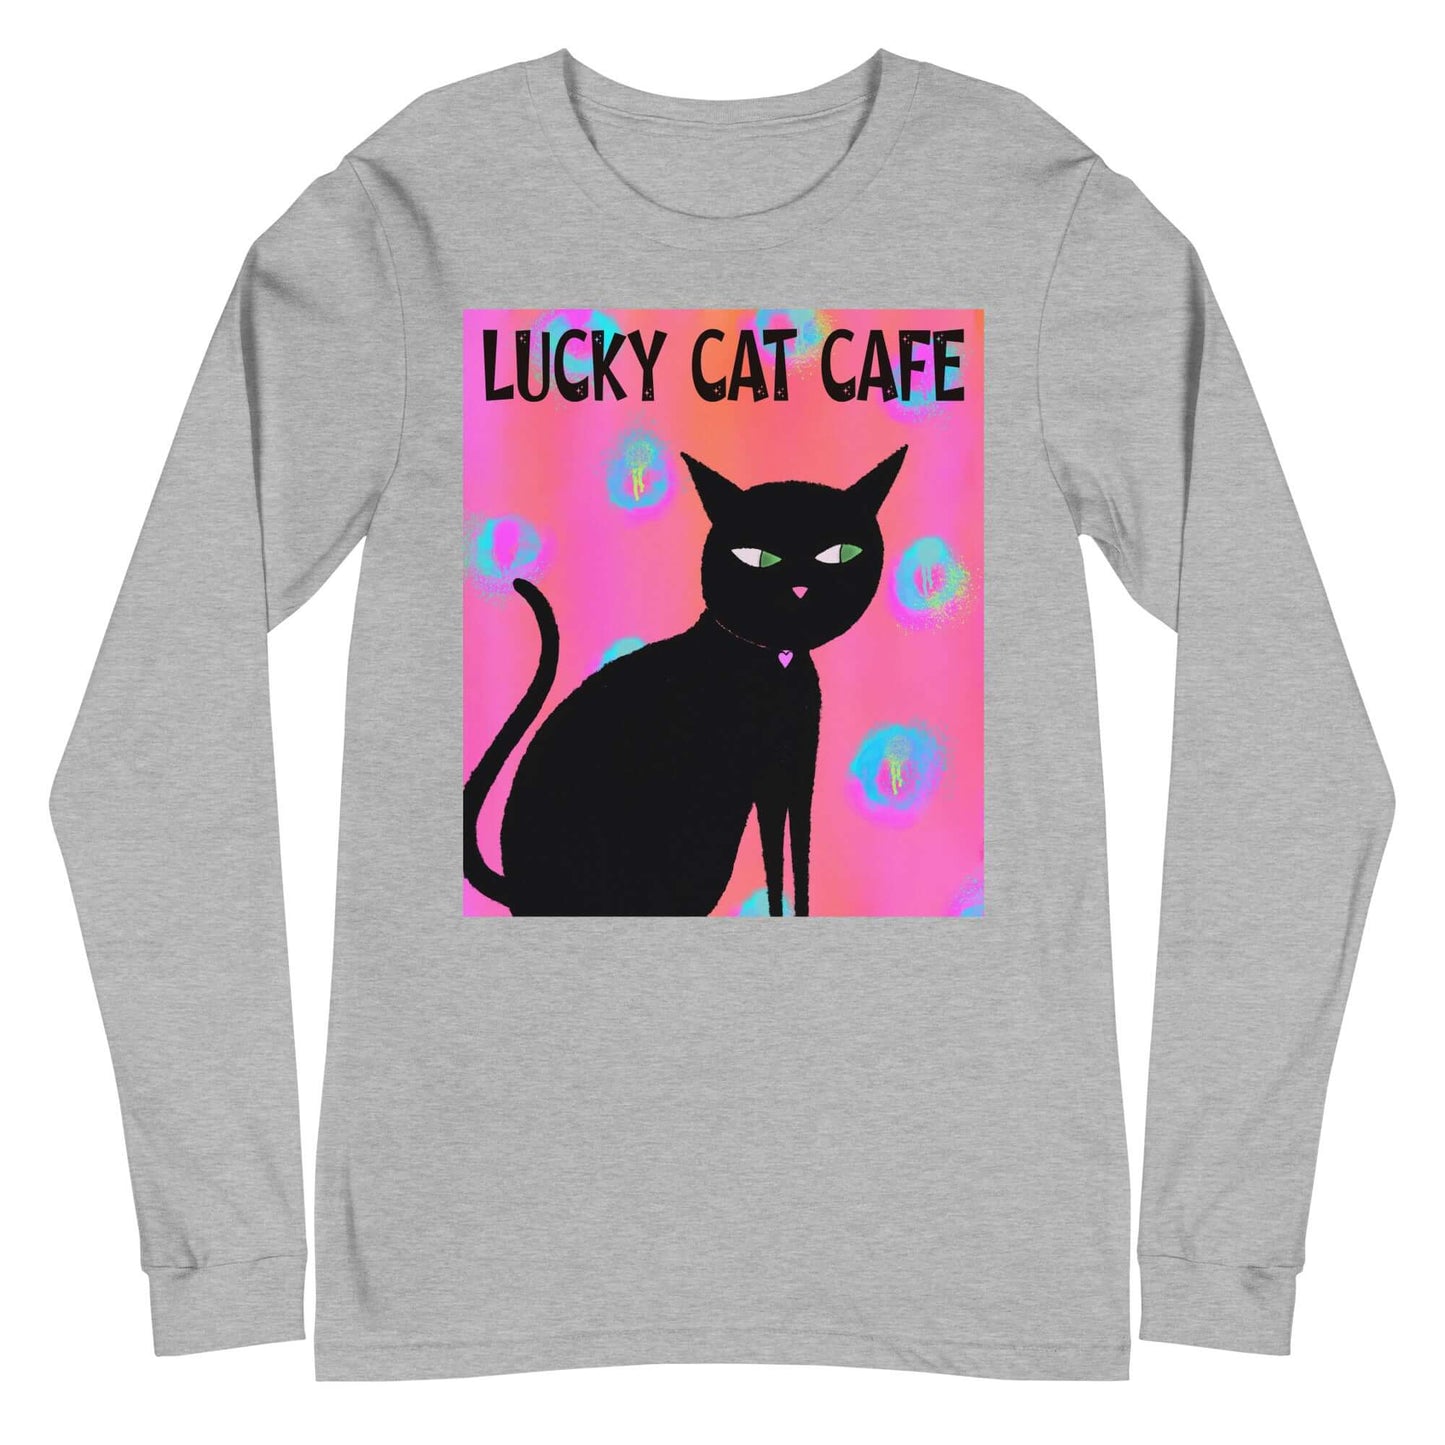 Black Cat on Hot Pink Tie Dye Background with Text “Lucky Cat Cafe” Unisex Long Sleeve Tee in Athletic Heather Gray